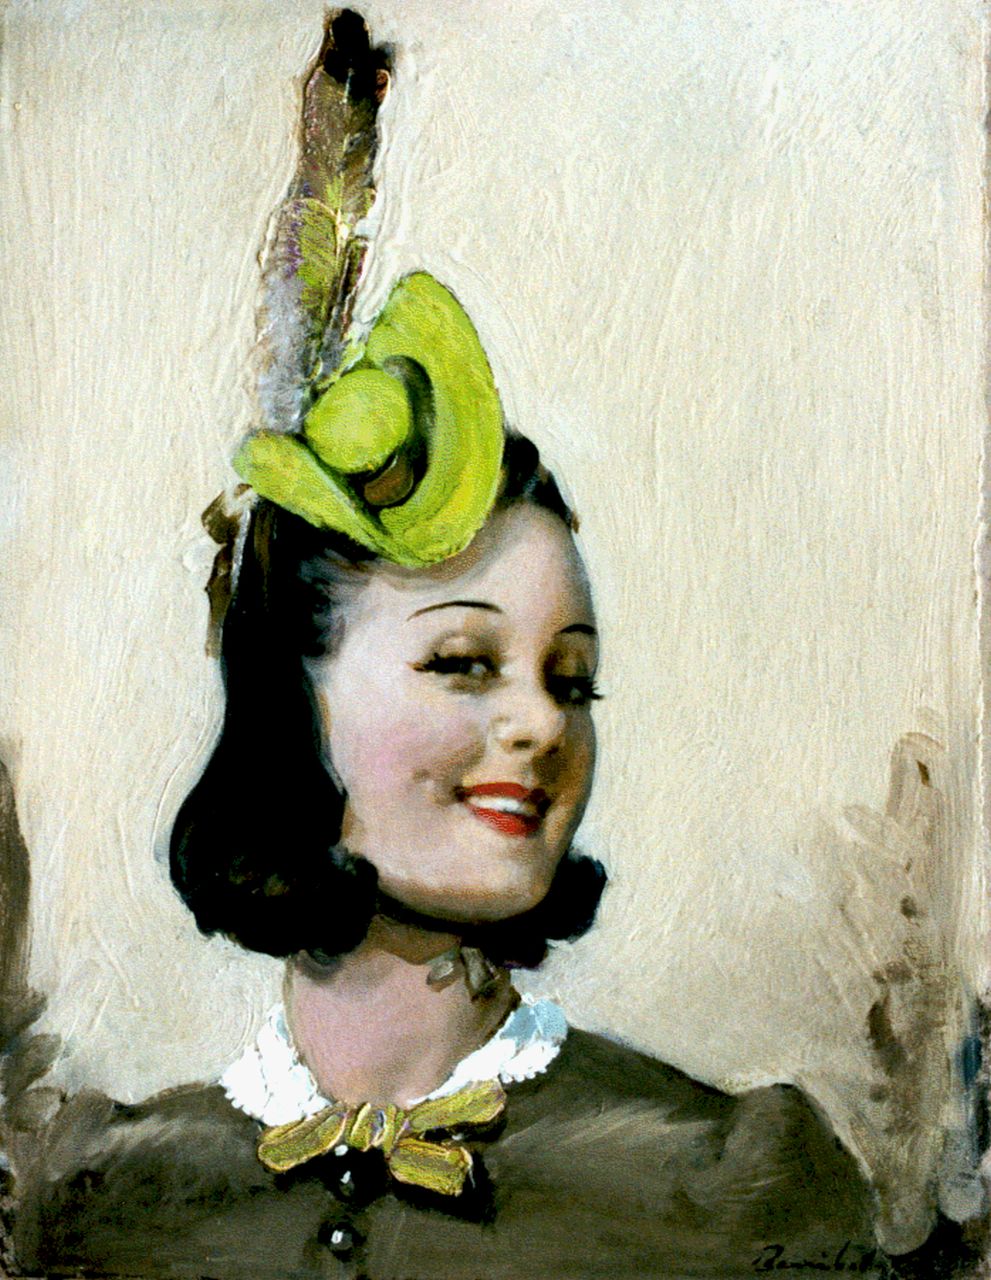 Barribal W.H.  | William H. Barribal, A lady with a green hat, Öl auf Malereifaser 42,8 x 32,8 cm, signed l.r.